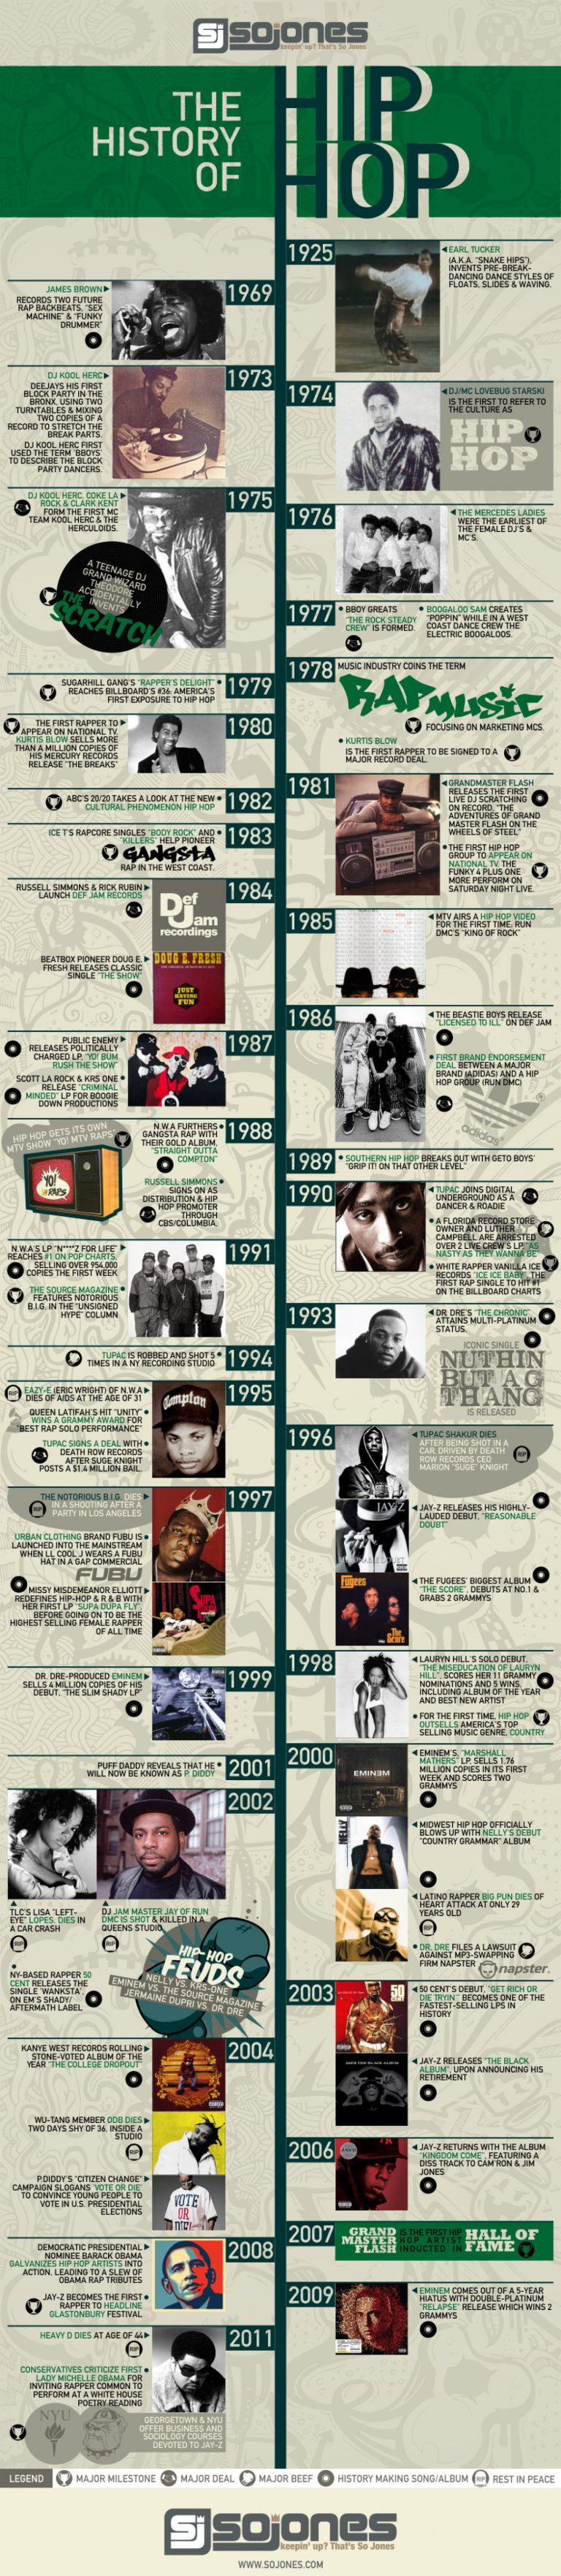 Discover the Ultimate History of Rap Music Timeline